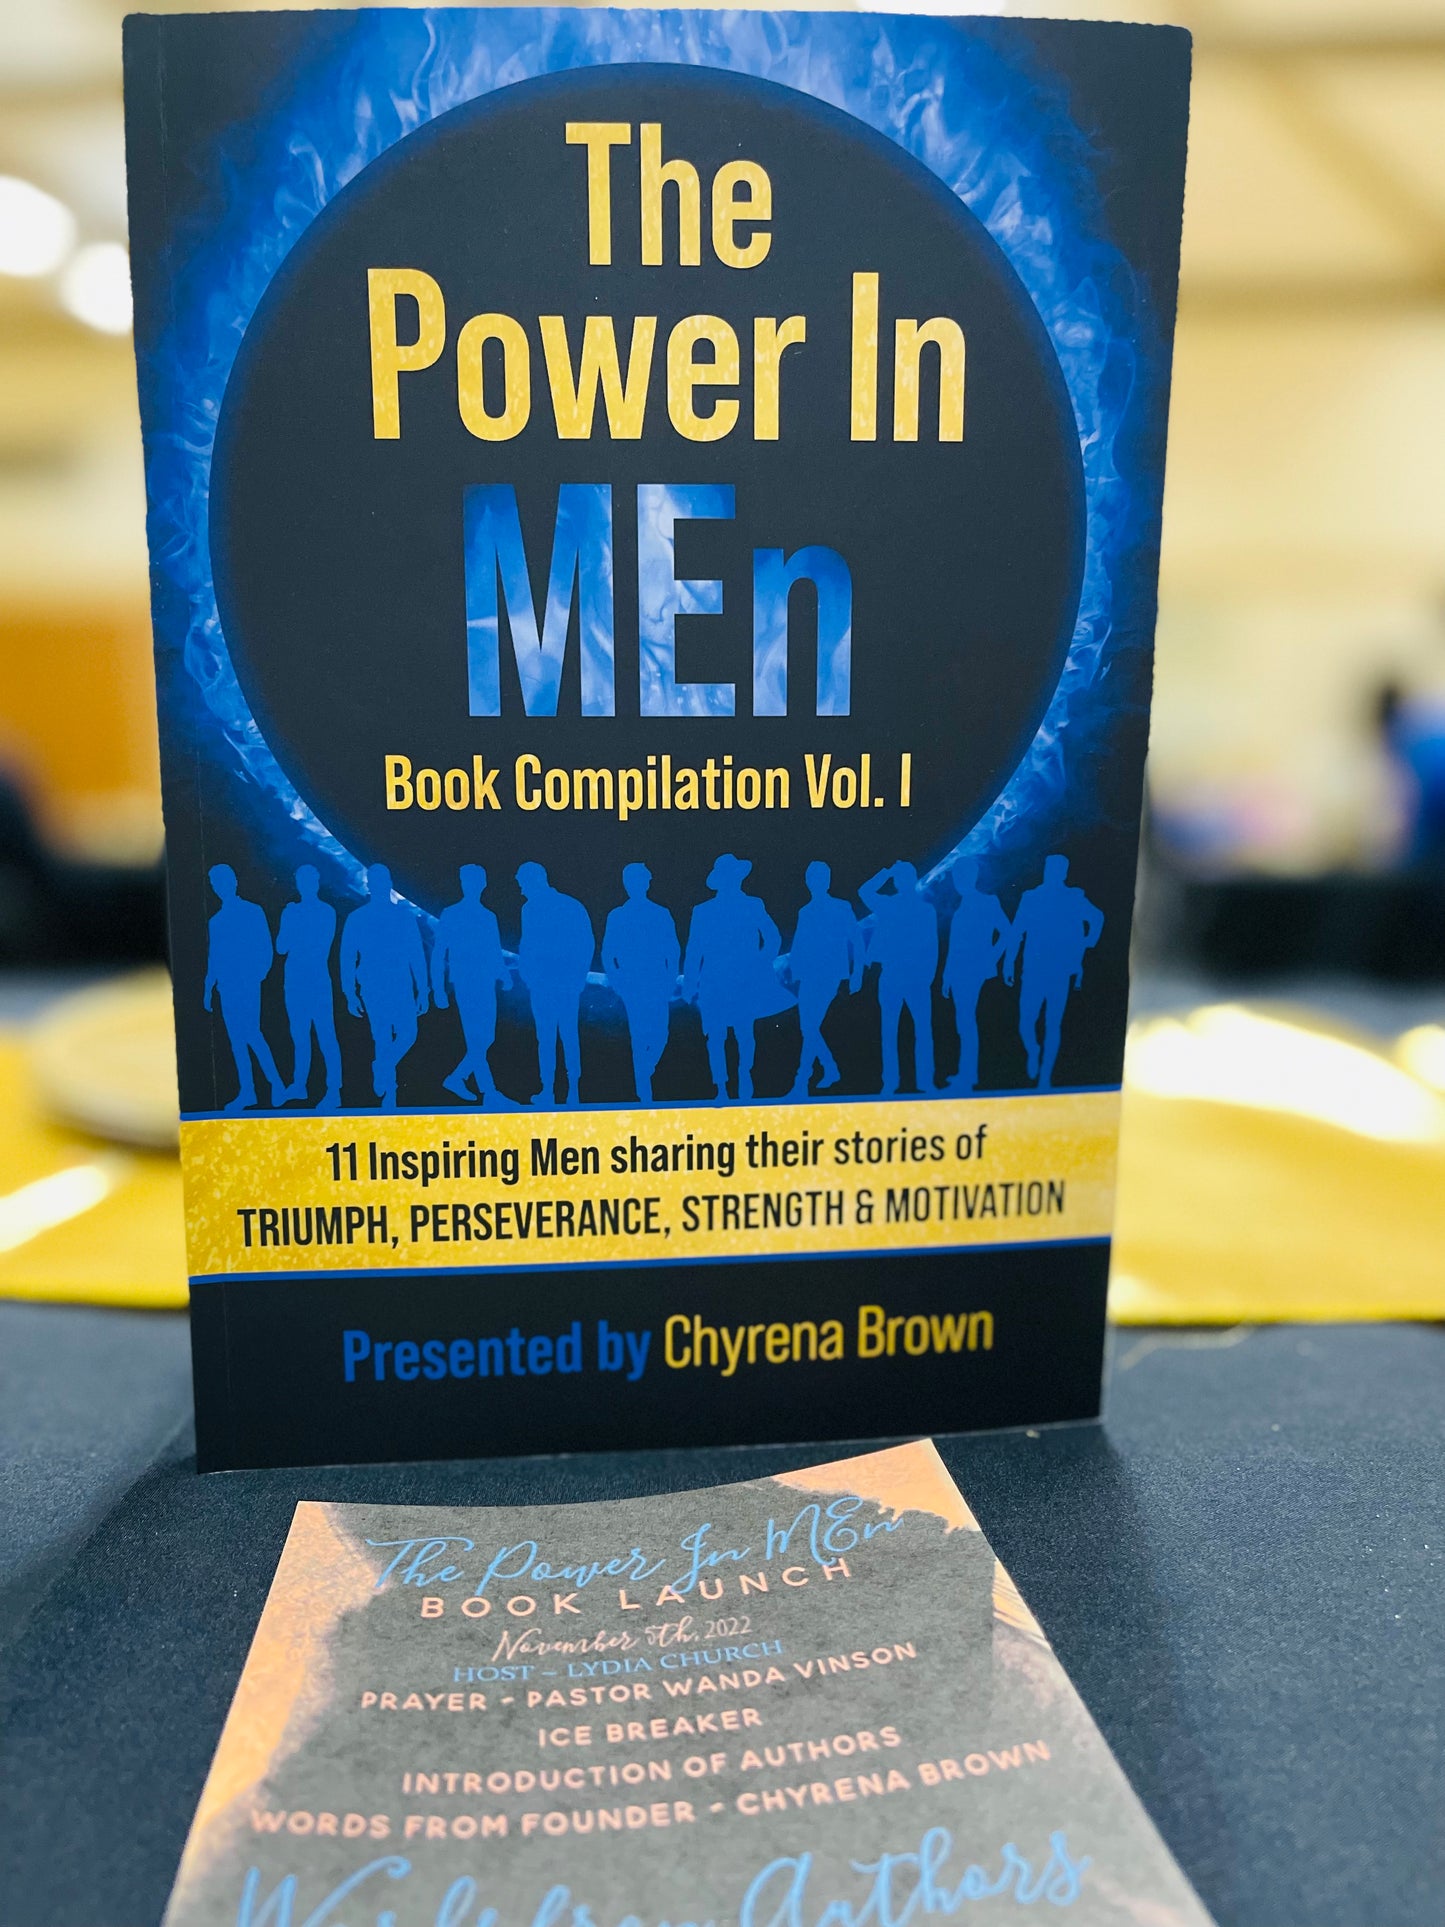 The Power In Men book compilation Vol.1